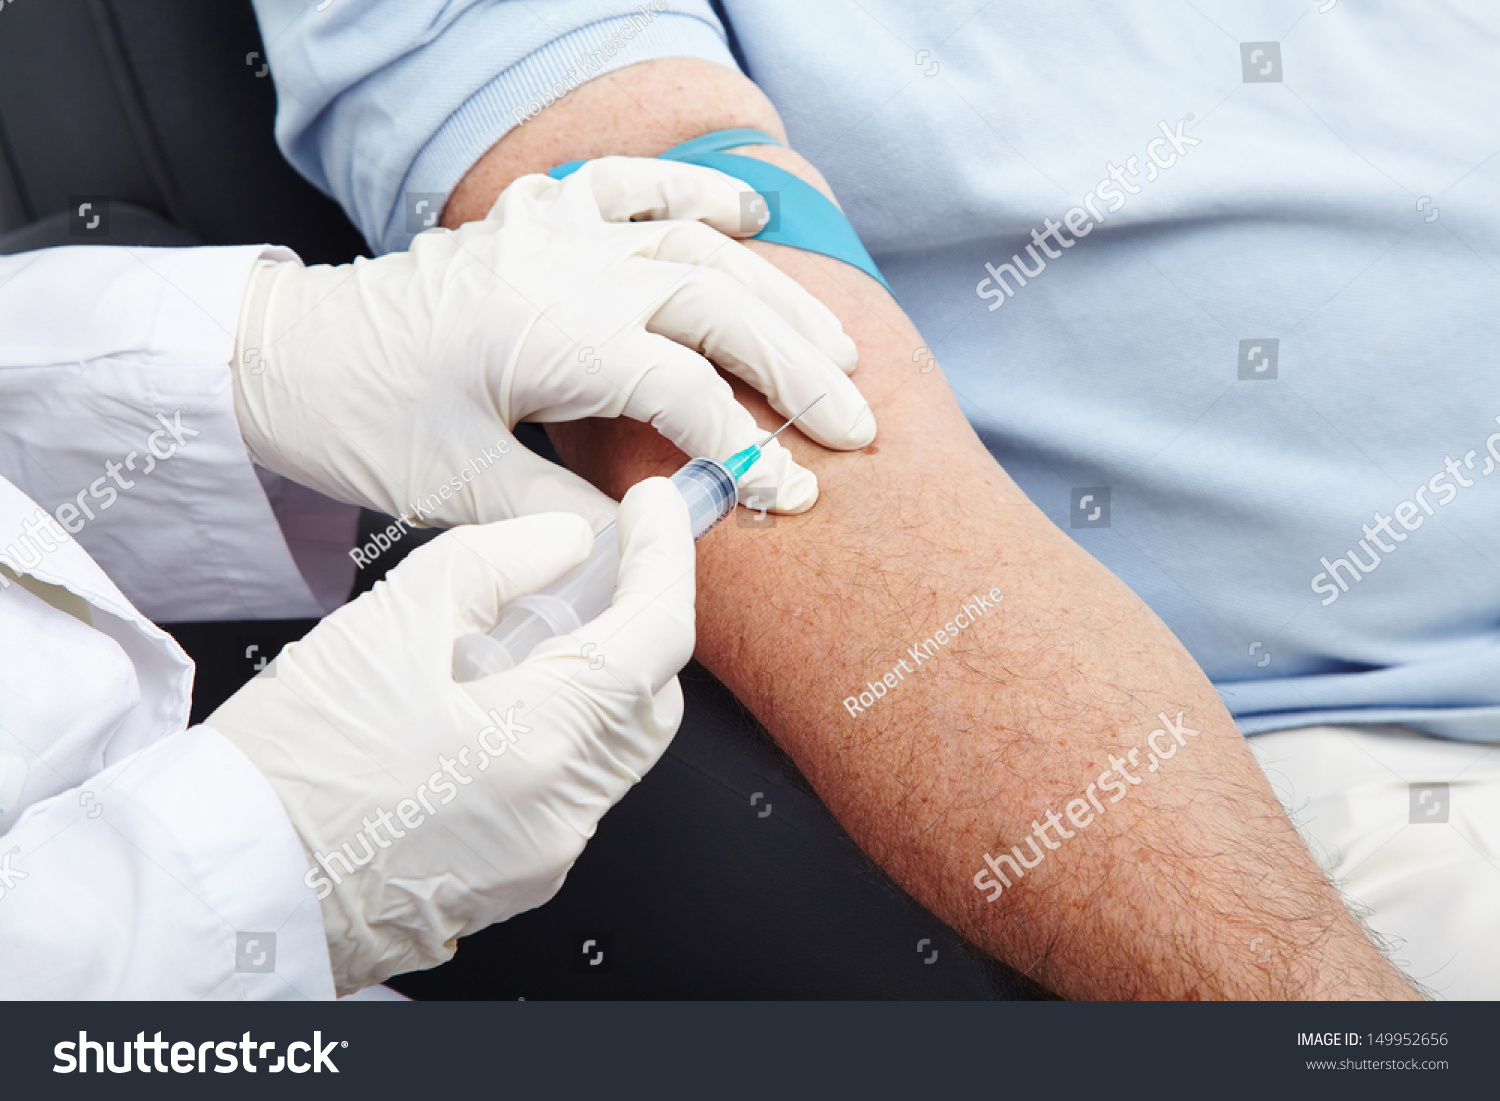 Man giving blood donation with syringe in his arm #149952656